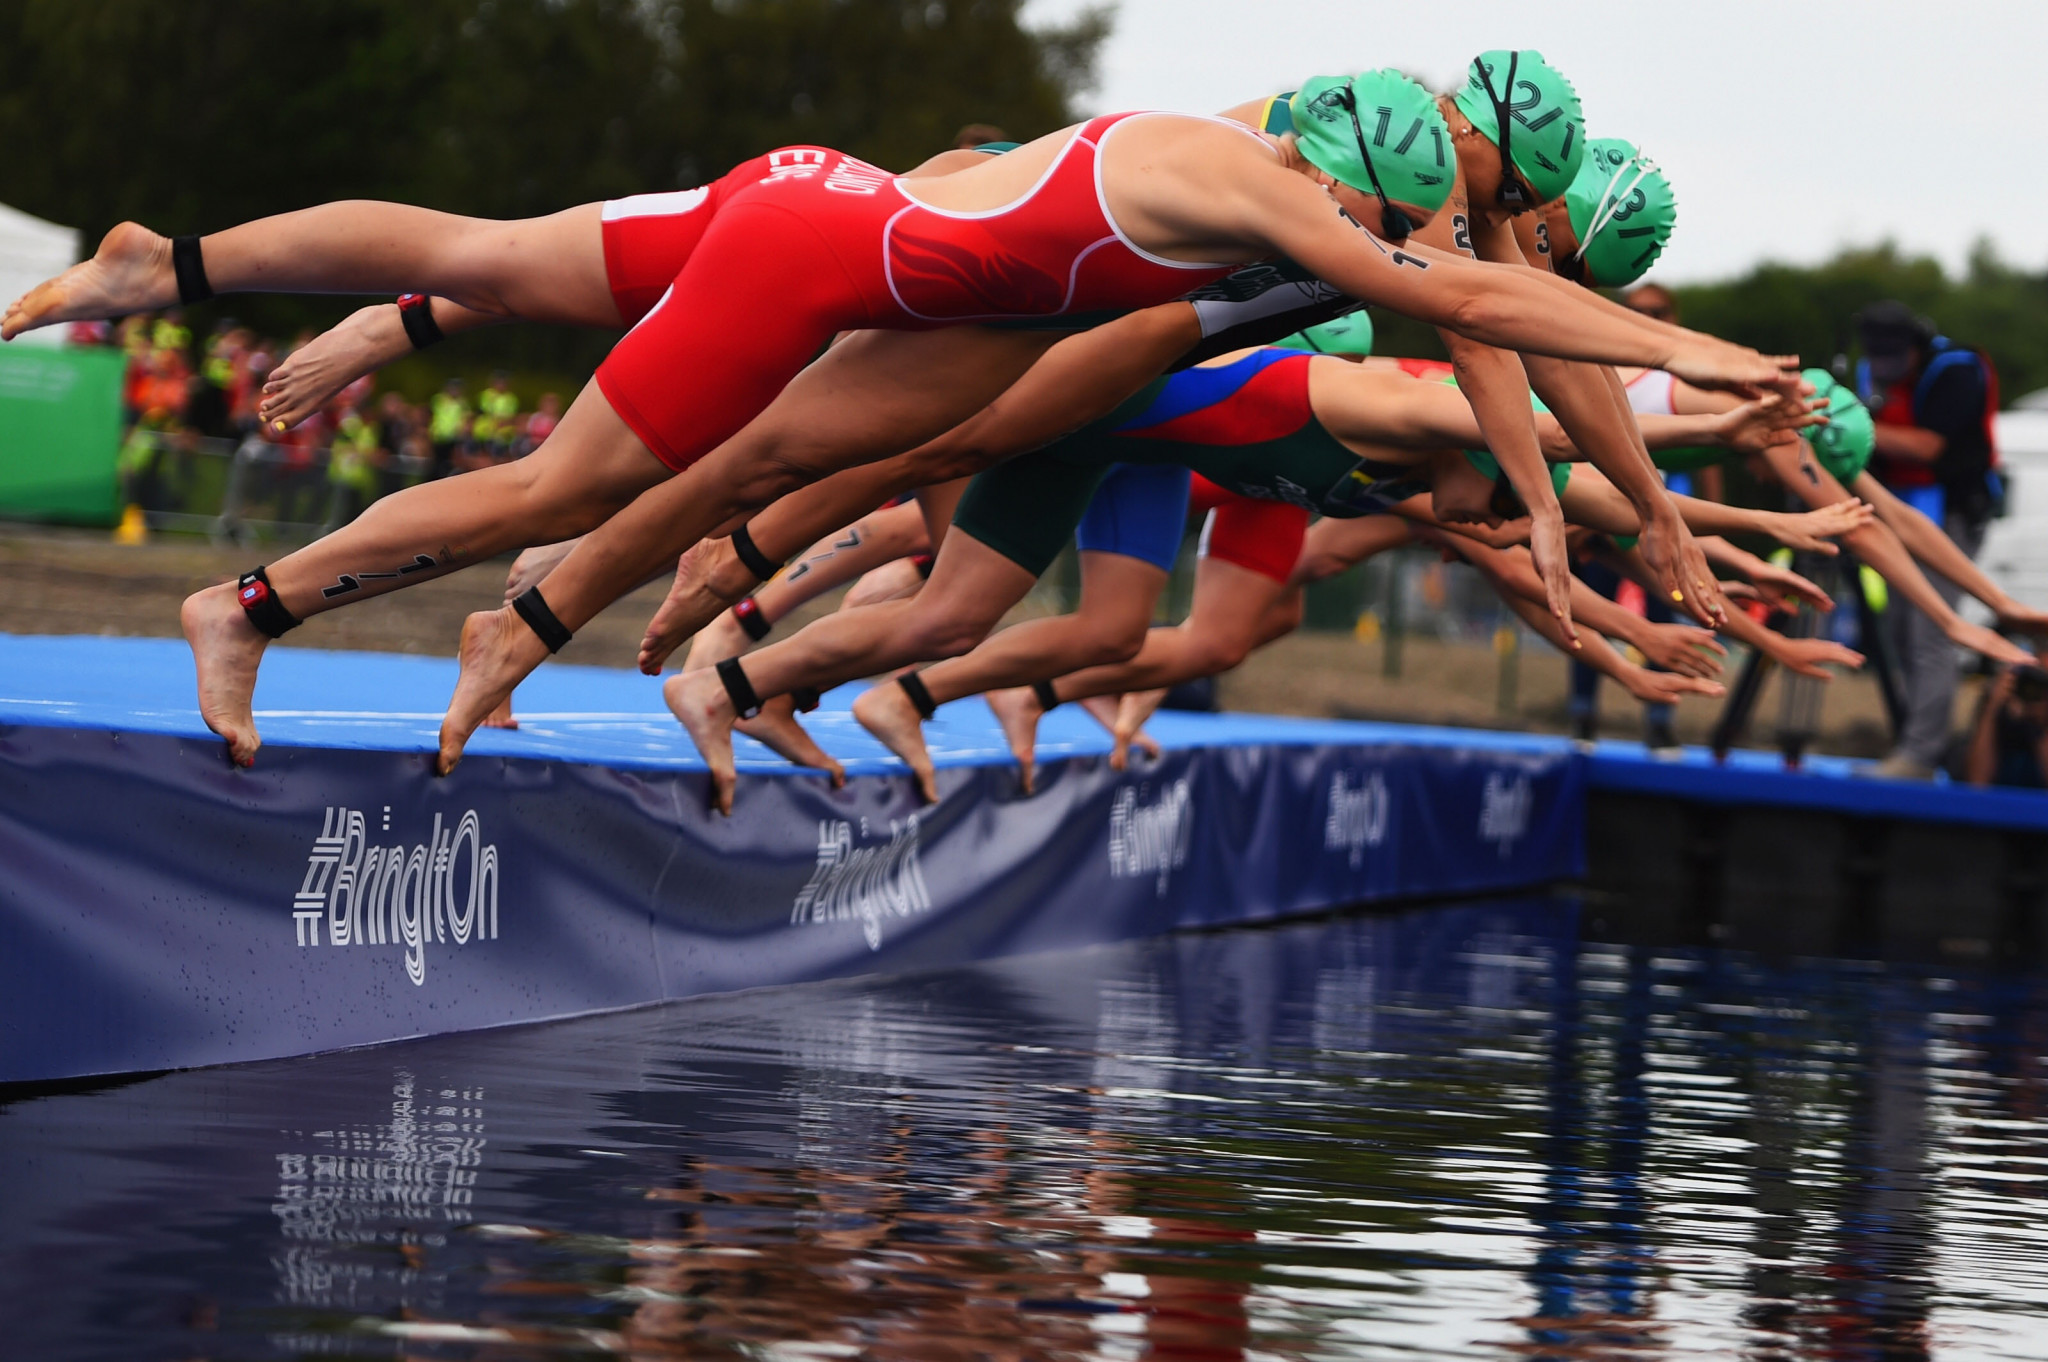 Triathlon action at Strathclyde Country Park during the Glasgow 2014 Commonwealth Games ©Getty Images